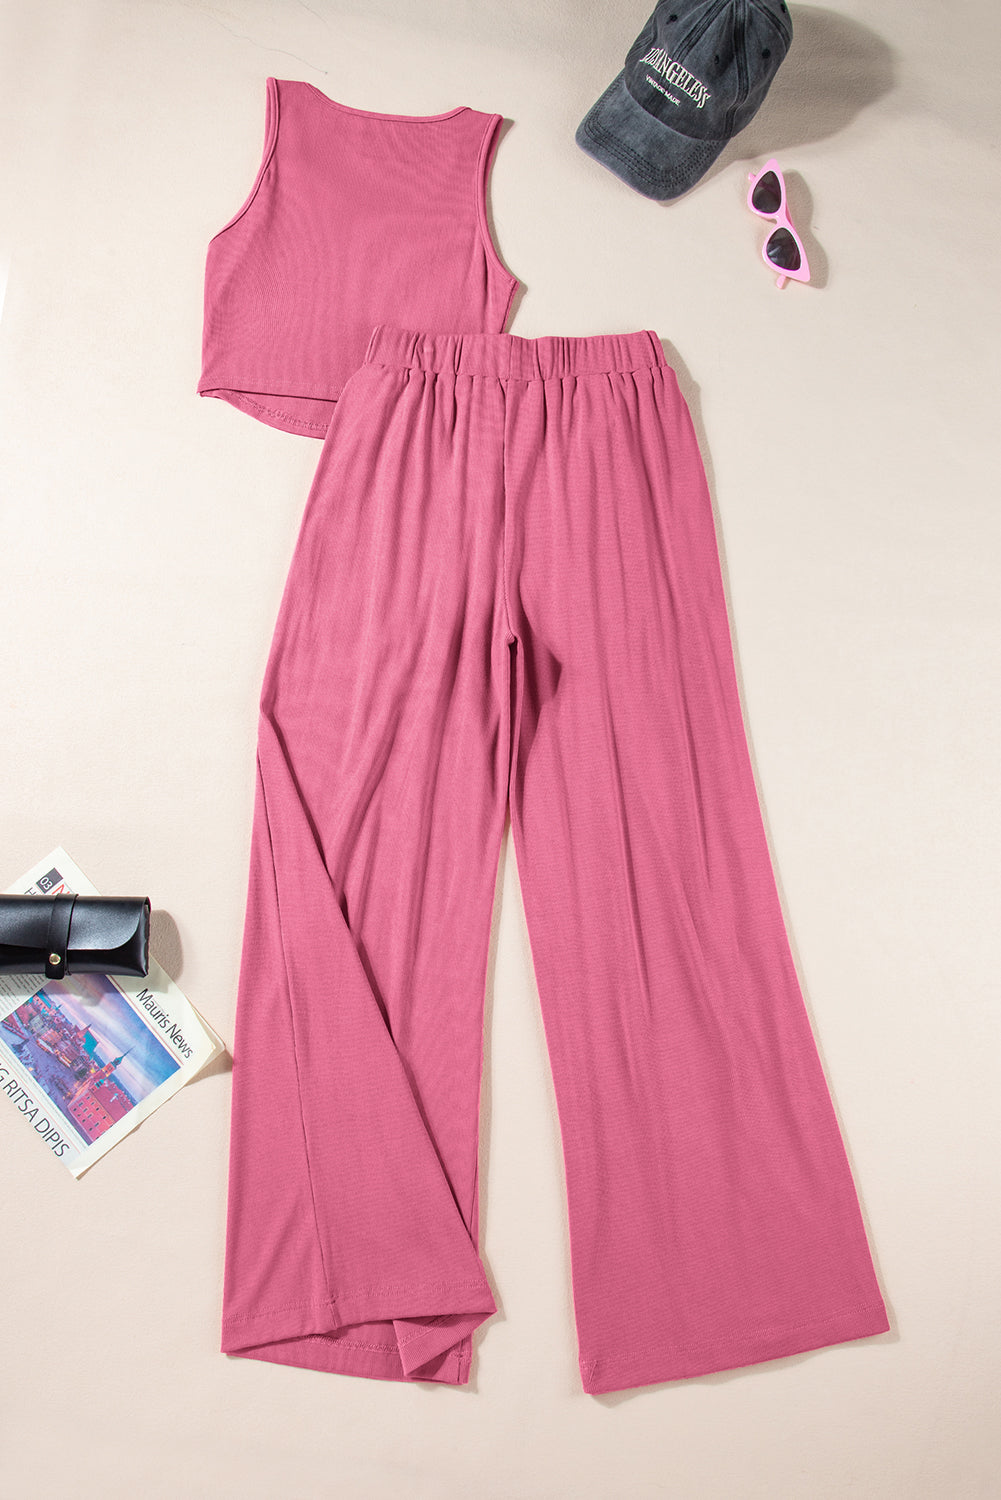 - Pink Textured Sleeveless Crop Top and Wide Leg Pants Outfit Set - women's crop top & pants set at TFC&H Co.